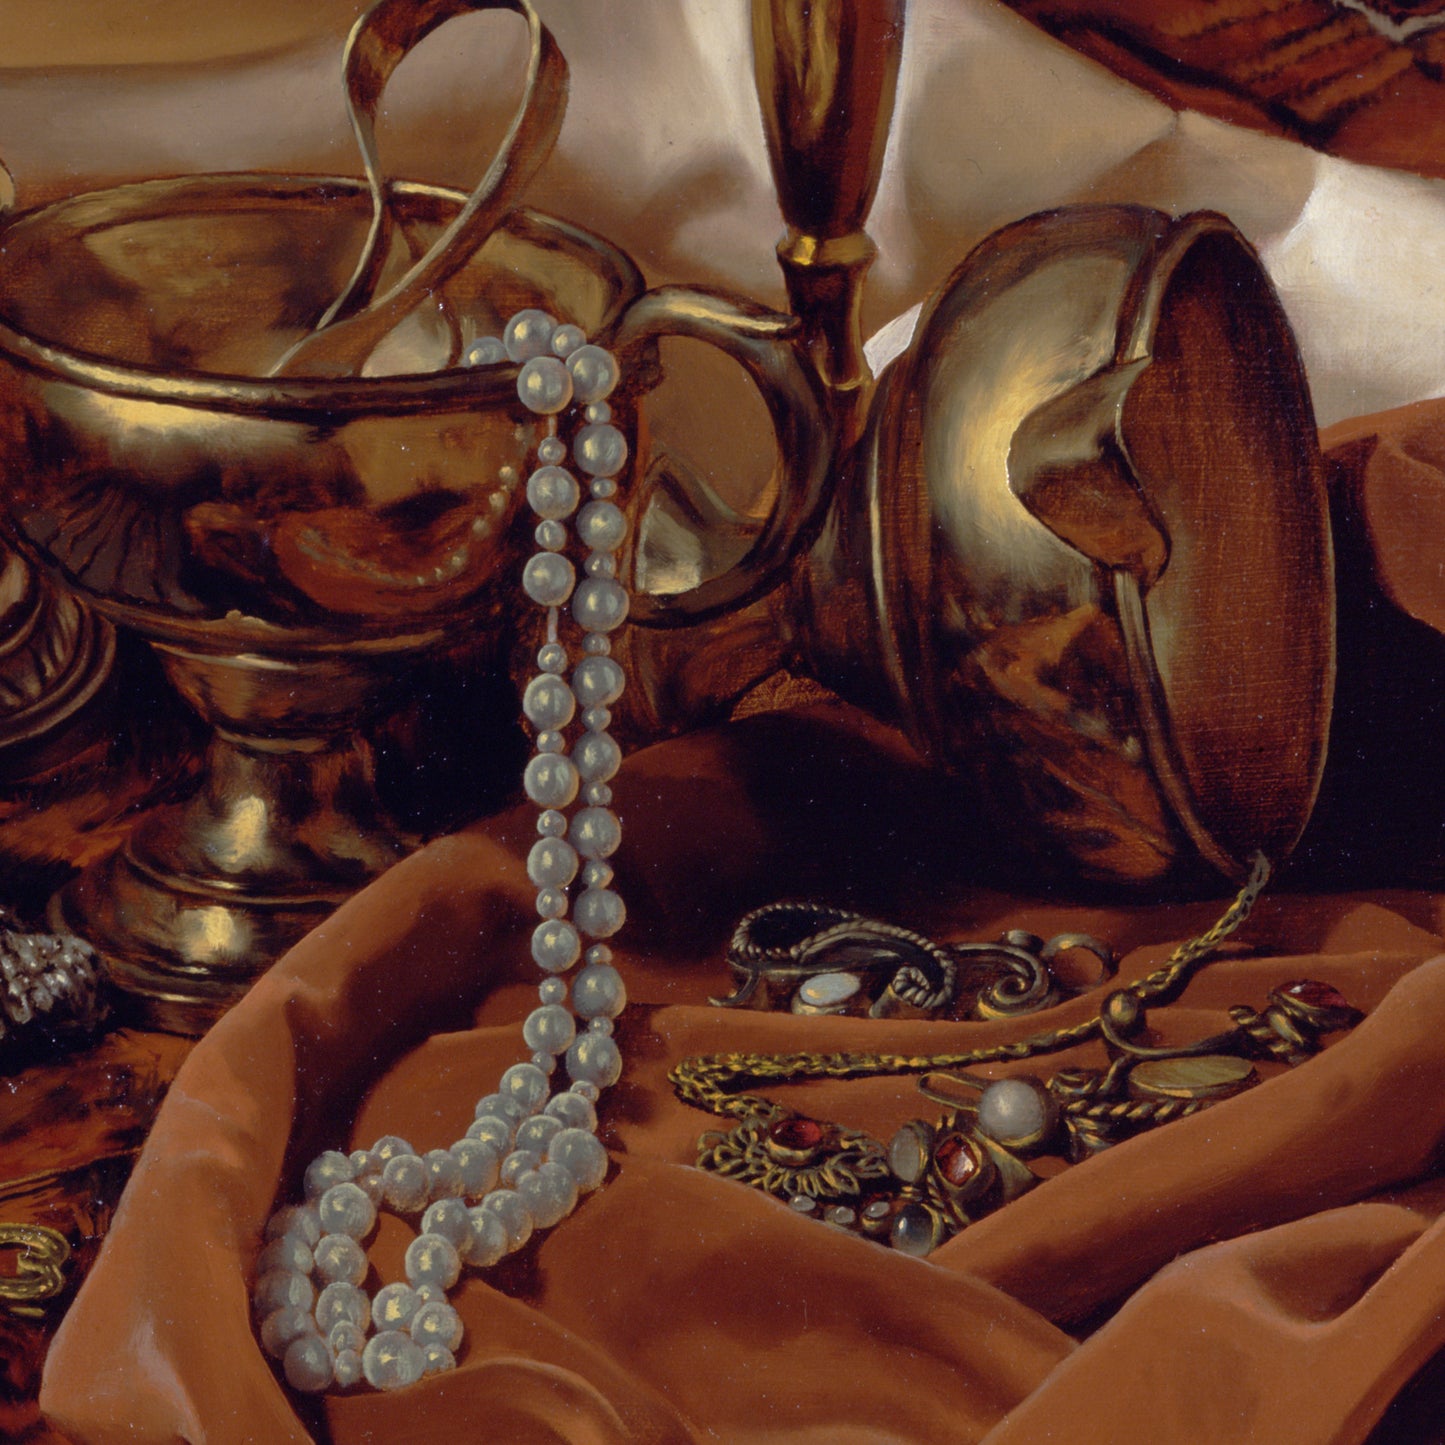 a painting showing gold and white with a red carpet, in the style of meticulous photorealistic still lifes, jewelry by painters and sculptors, detailed drapery, light indigo and brown, canon ae-1, eastern brushwork, metalwork jewelry